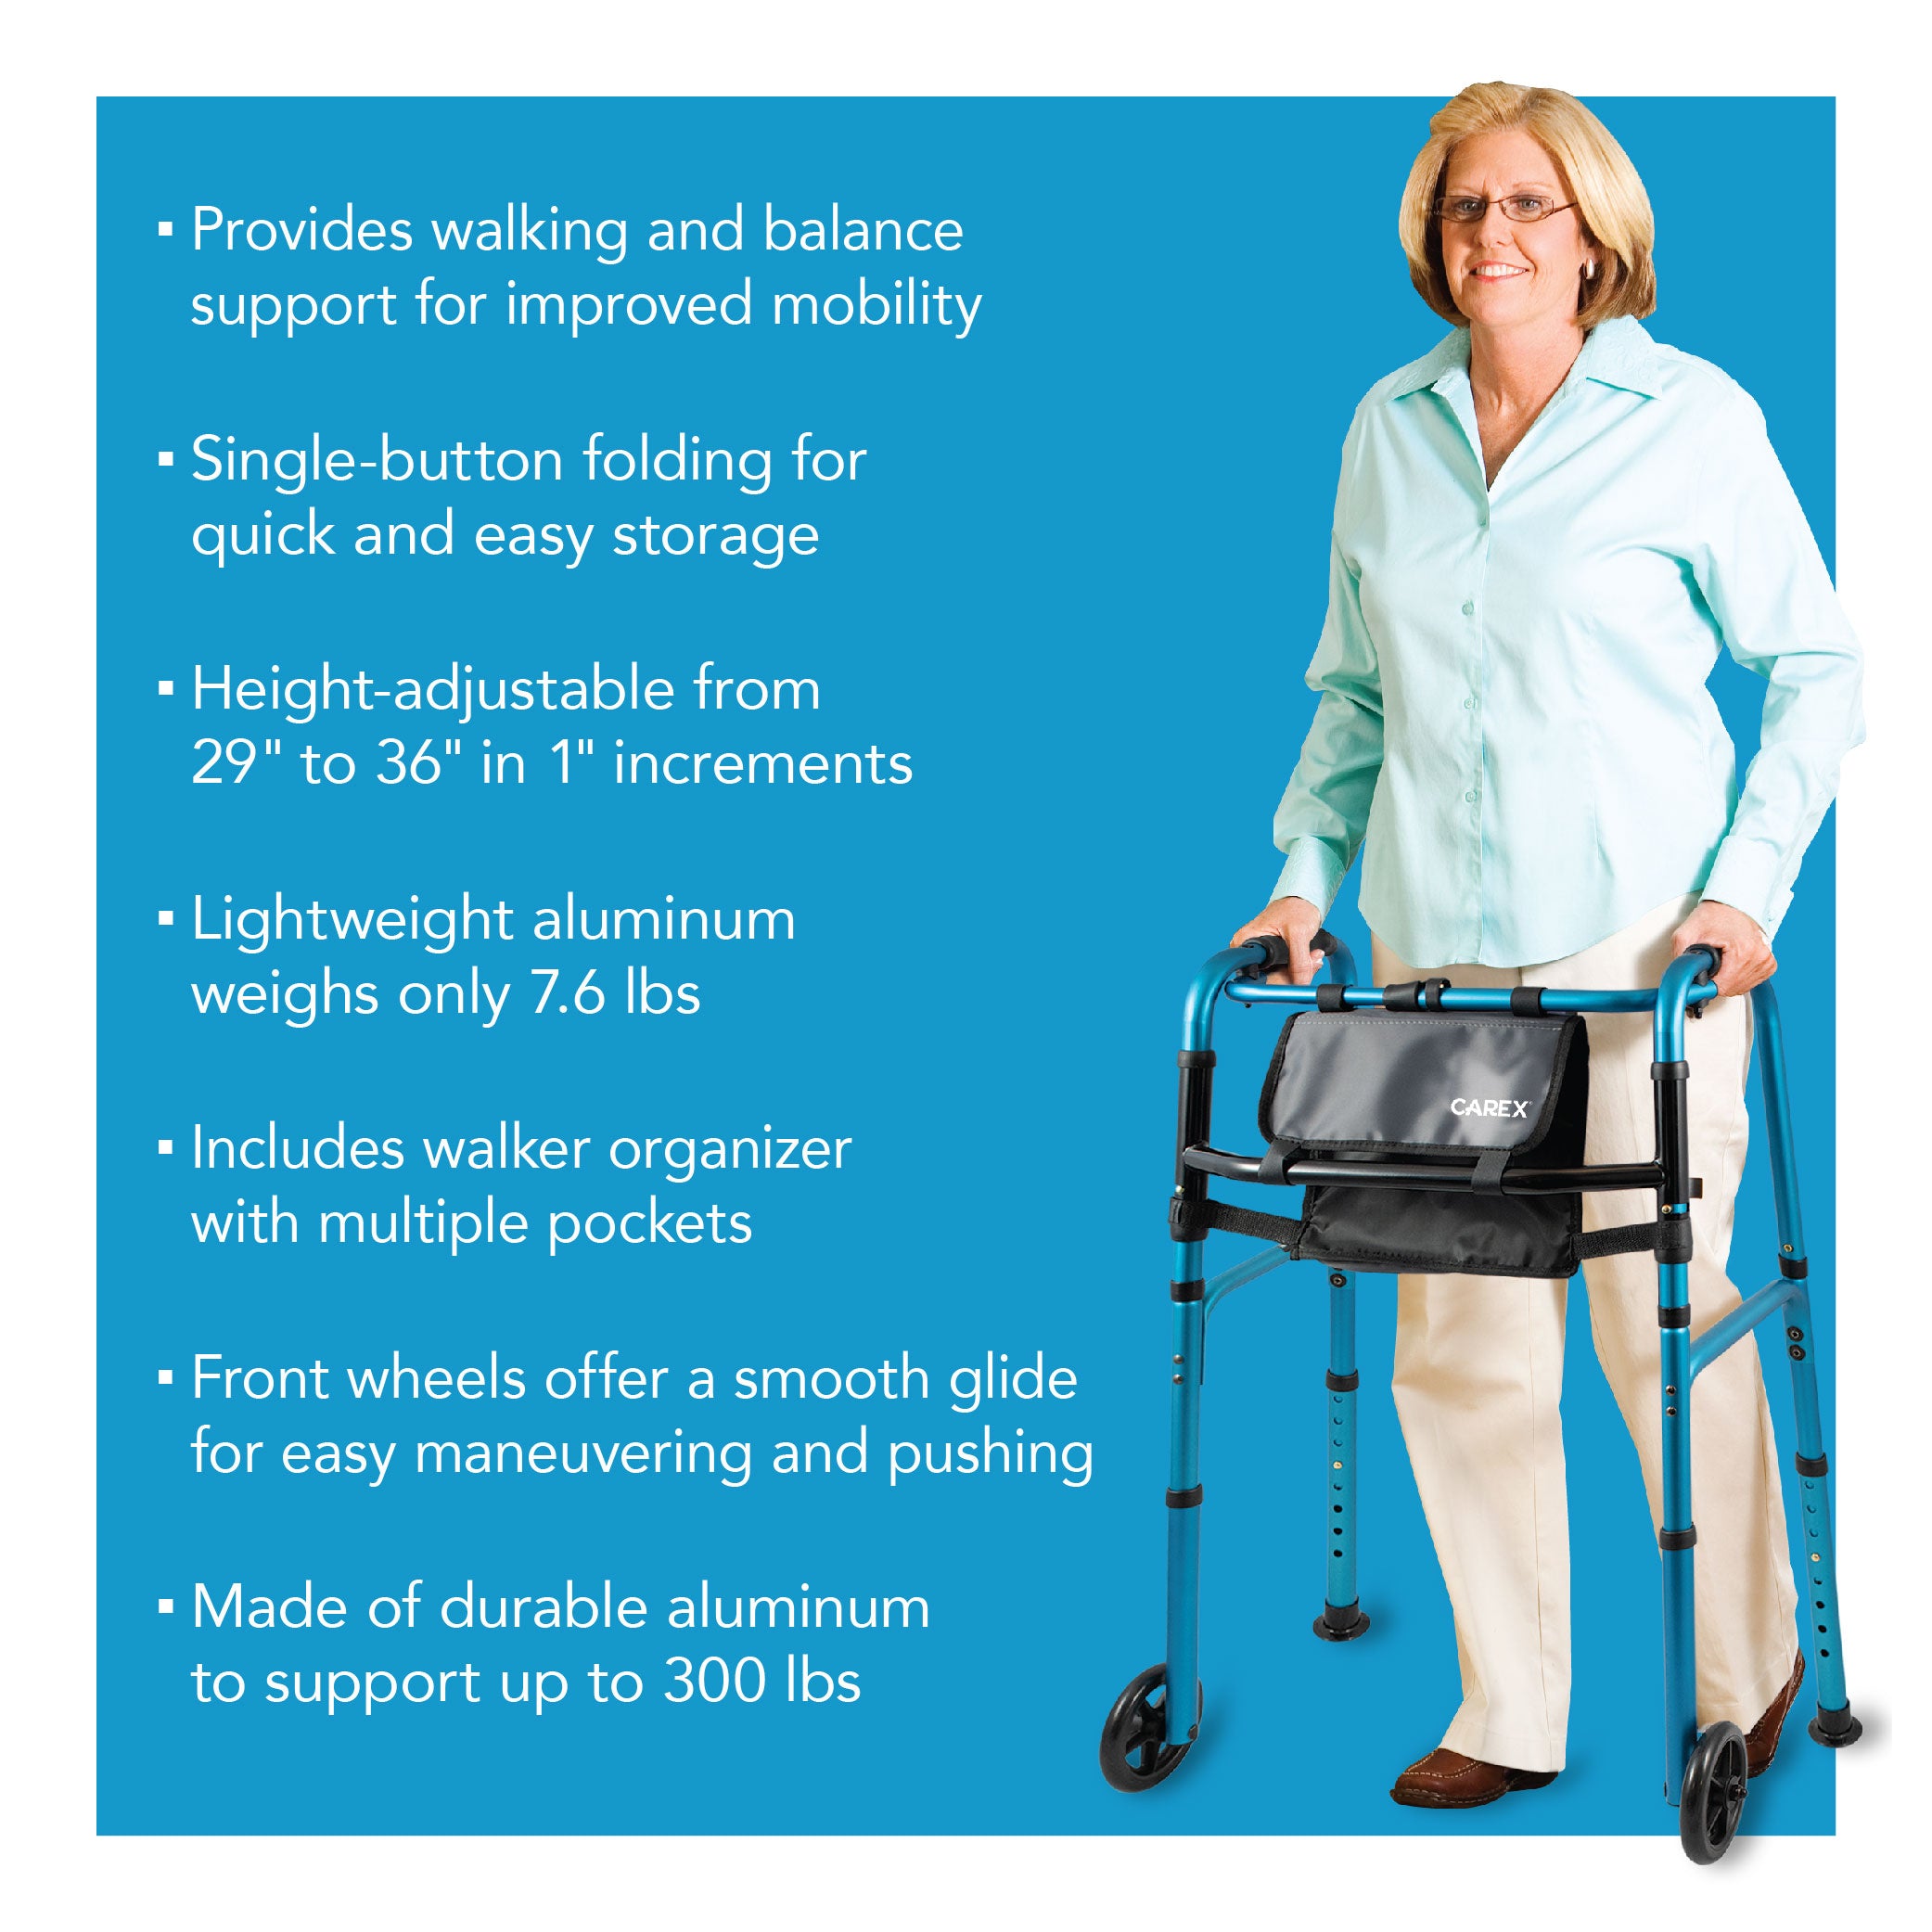 An elderly woman walking with a folding walker with wheels. Text showing the features and benefits as mentioned in the product's description.